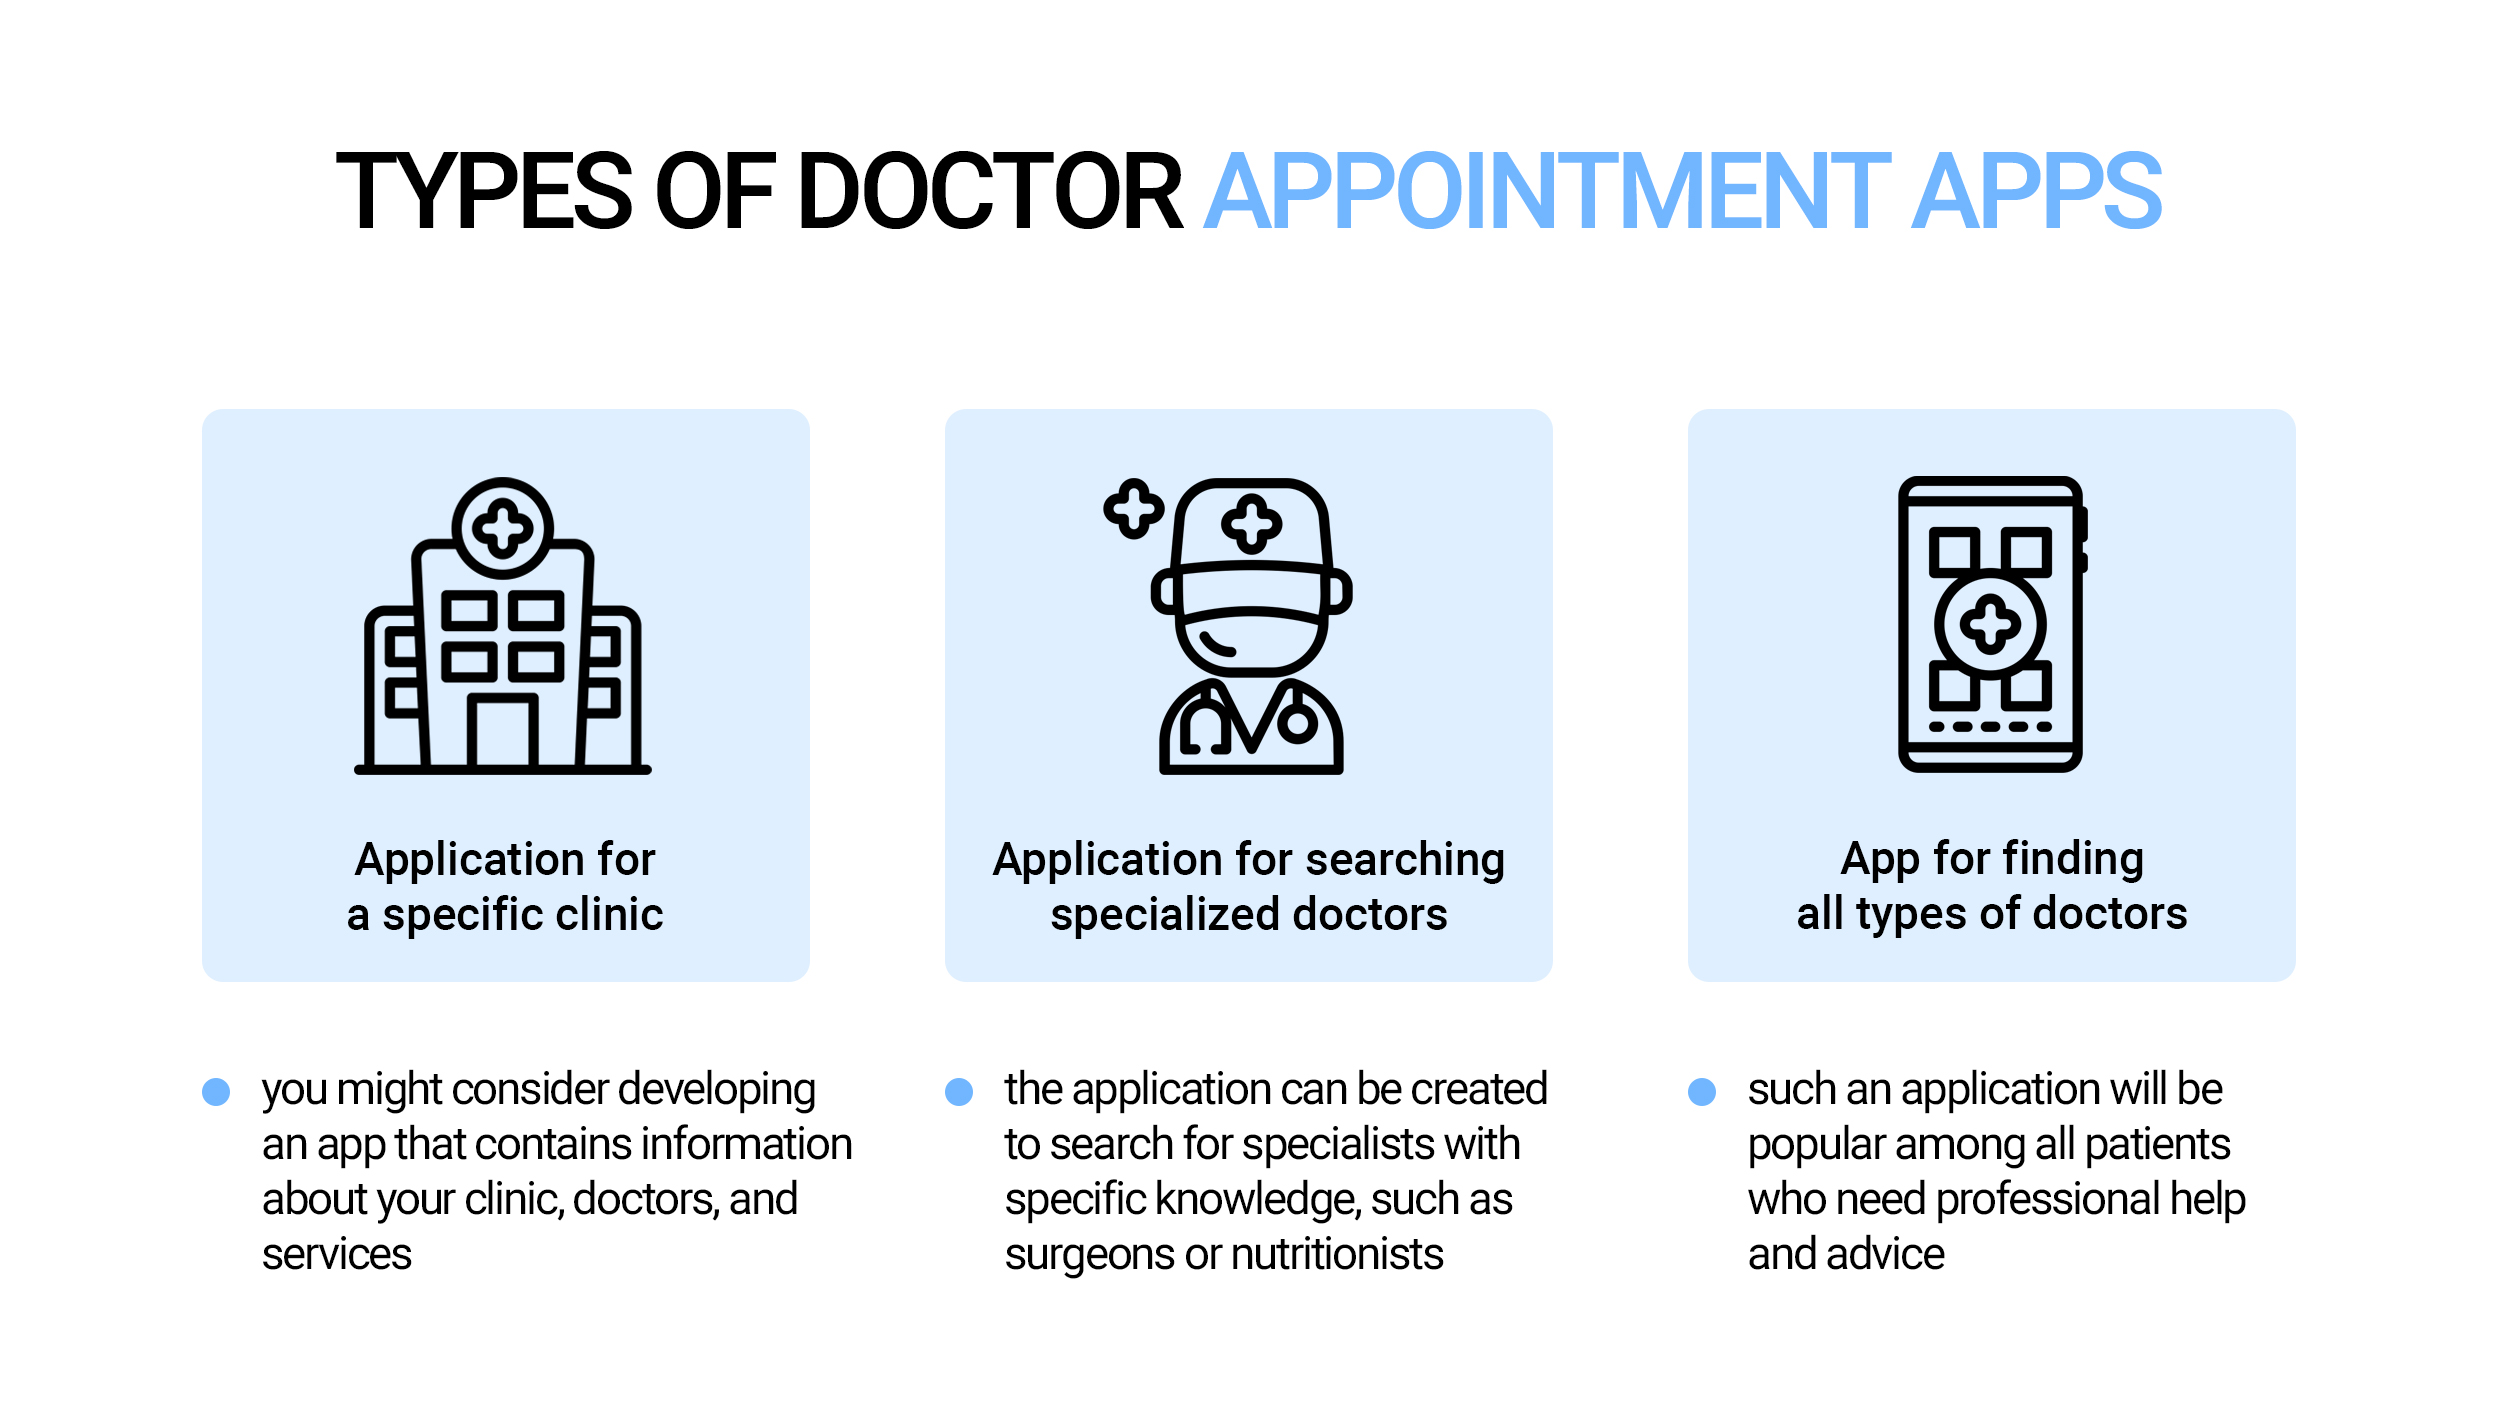 Types of doctor appointment apps